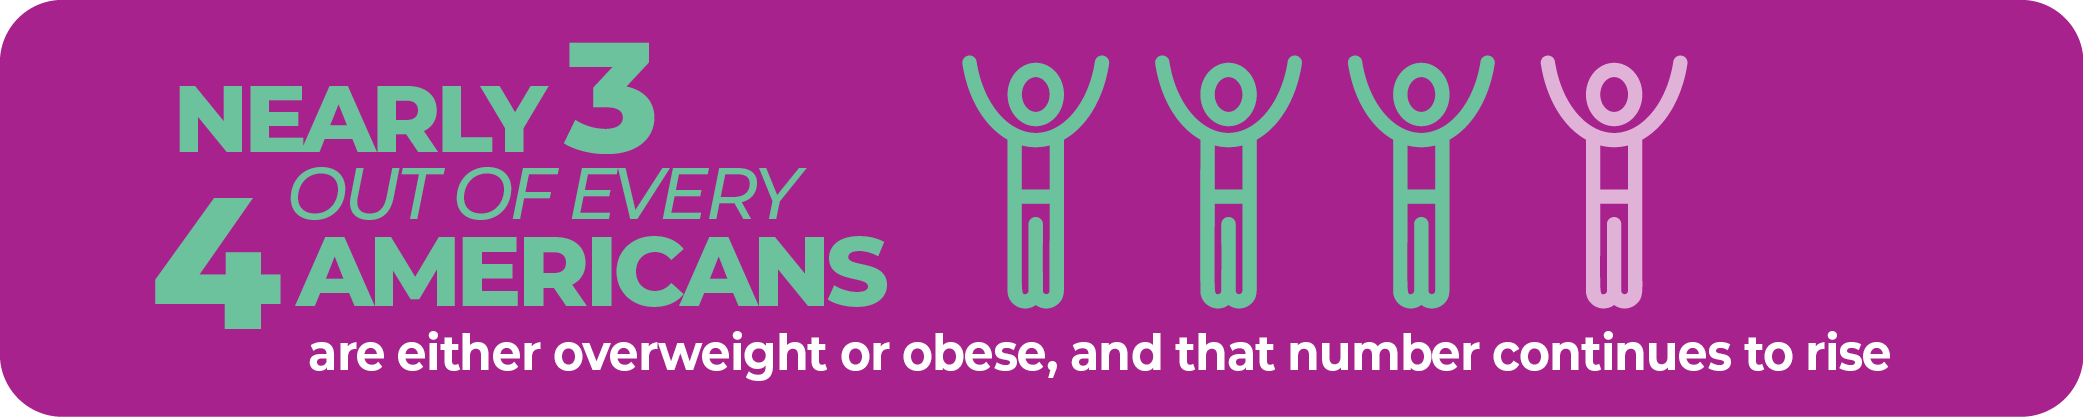 Nearly 3 out of every 4 americans are either overweight or obese, and that number continues to rise